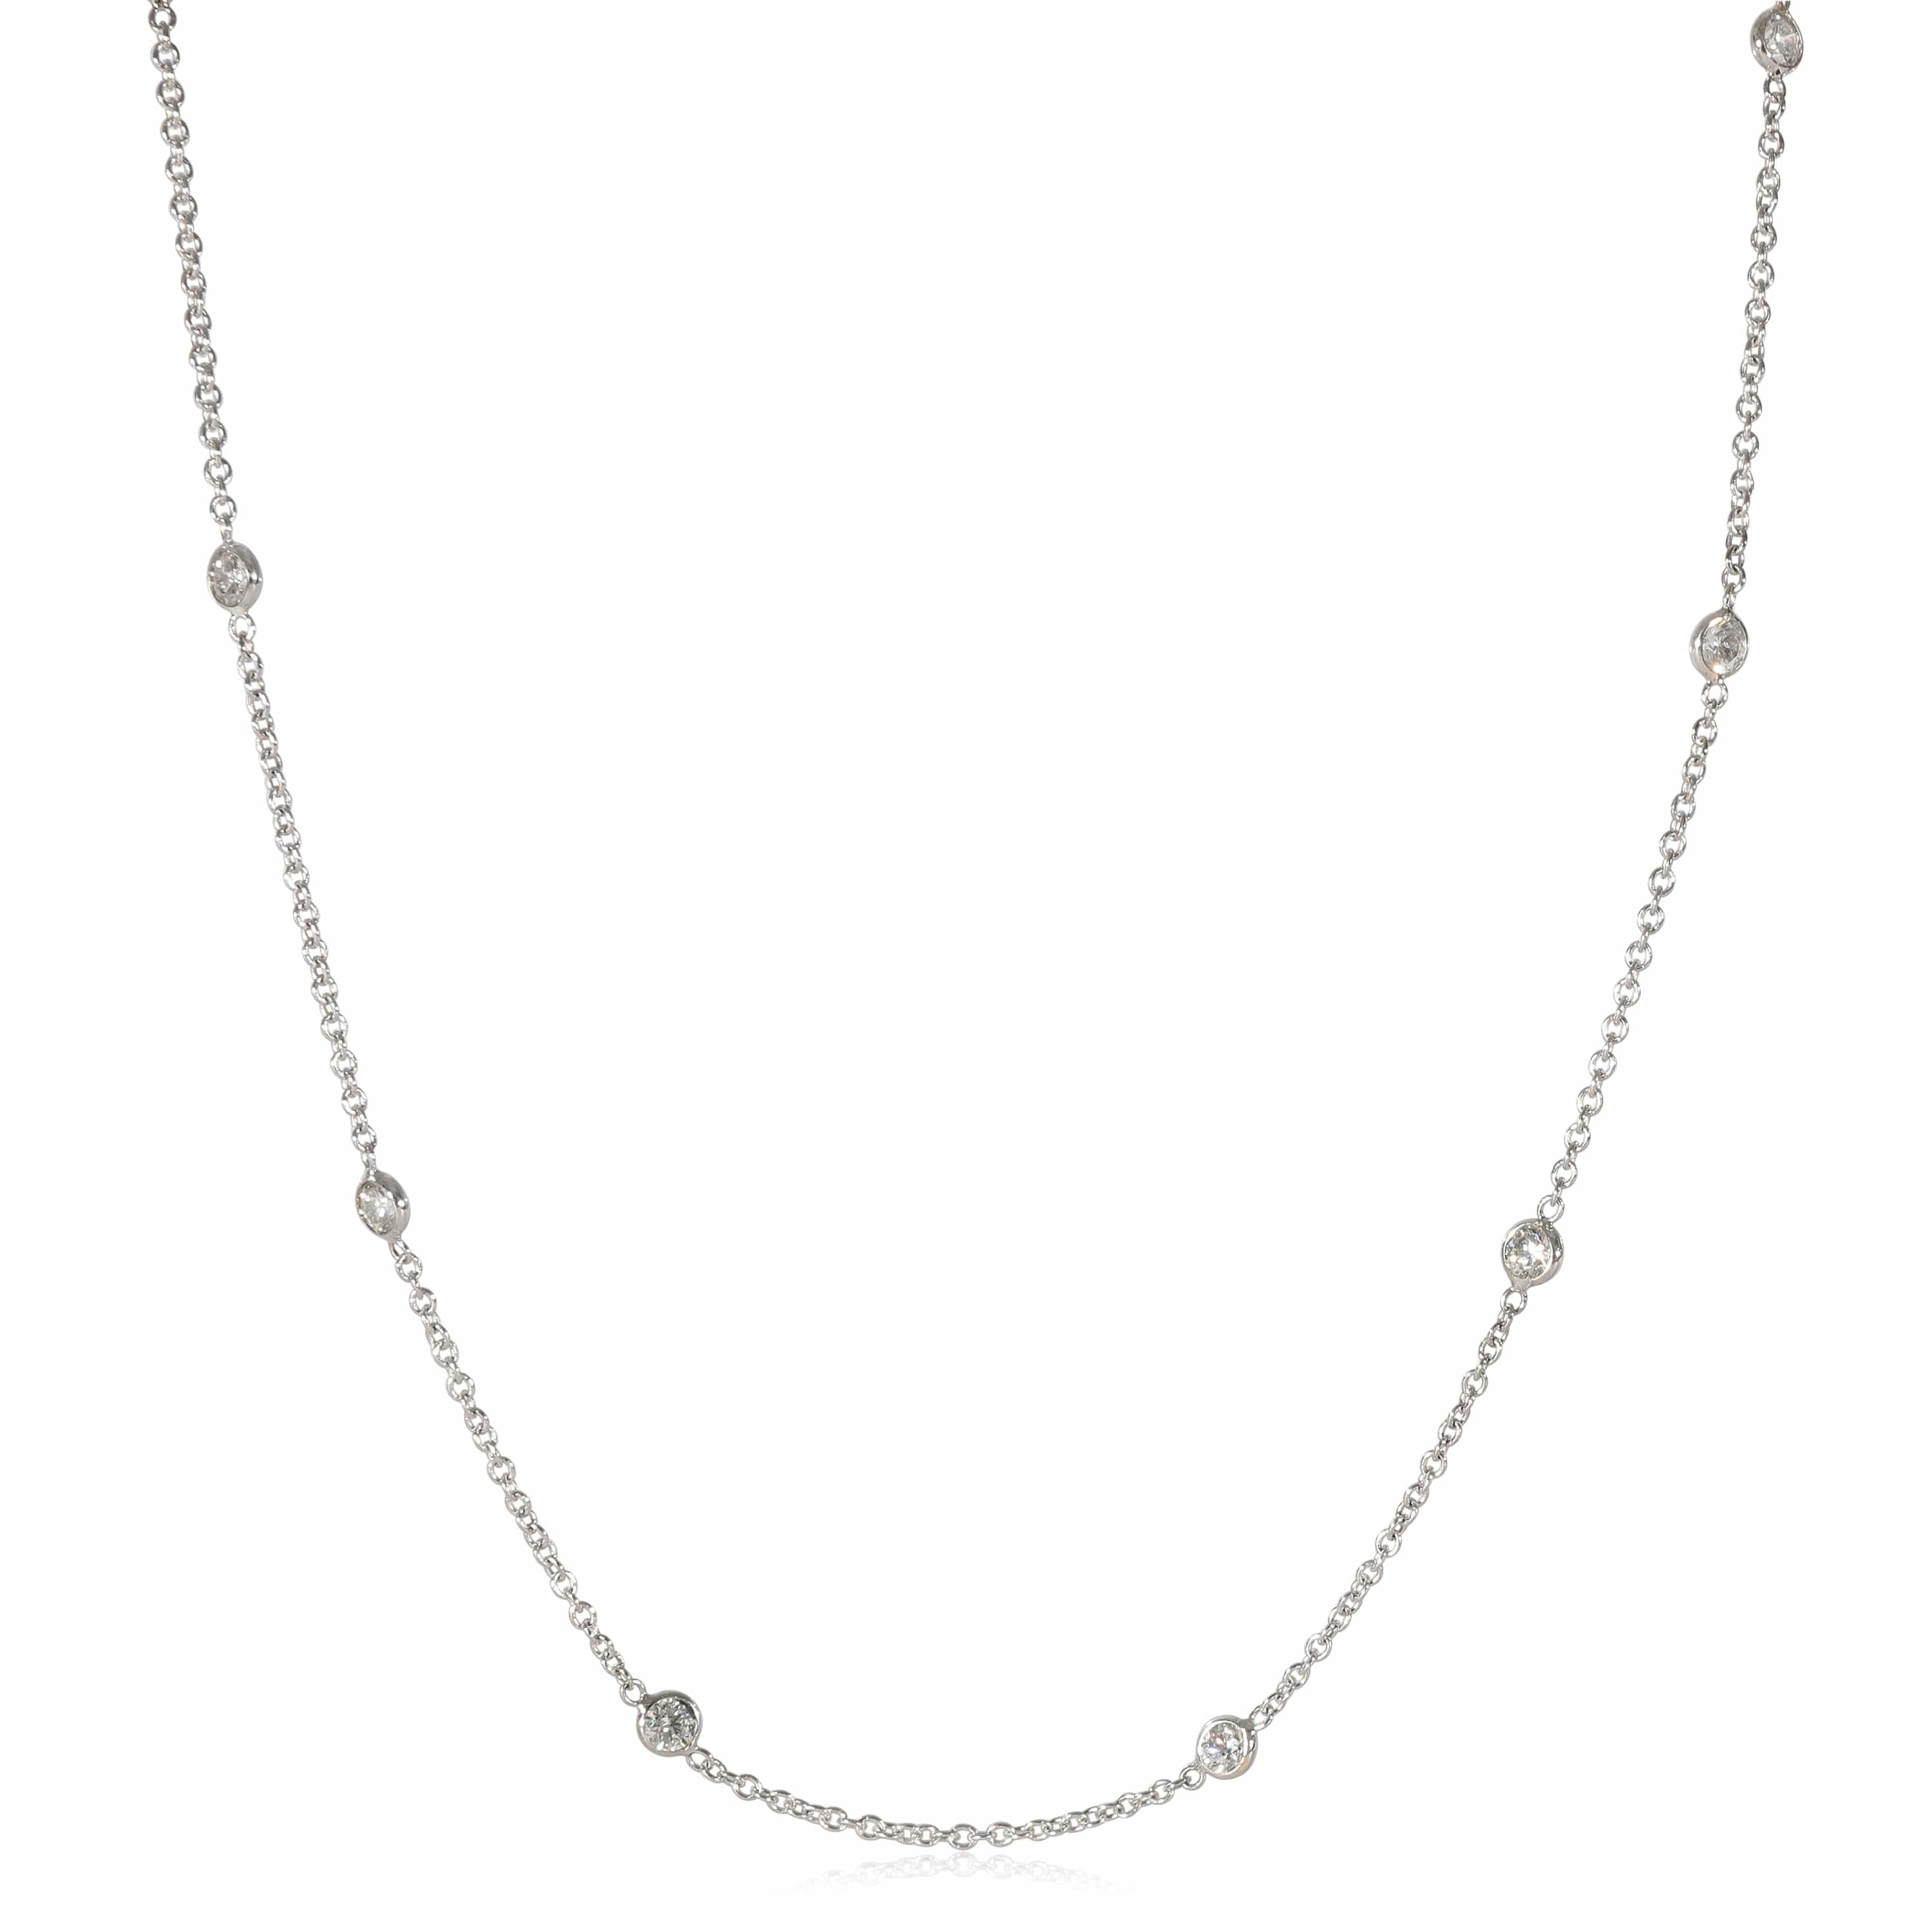 myGemma Diamonds by Set the Yard Necklace in 14K White Gold (1 CTW)